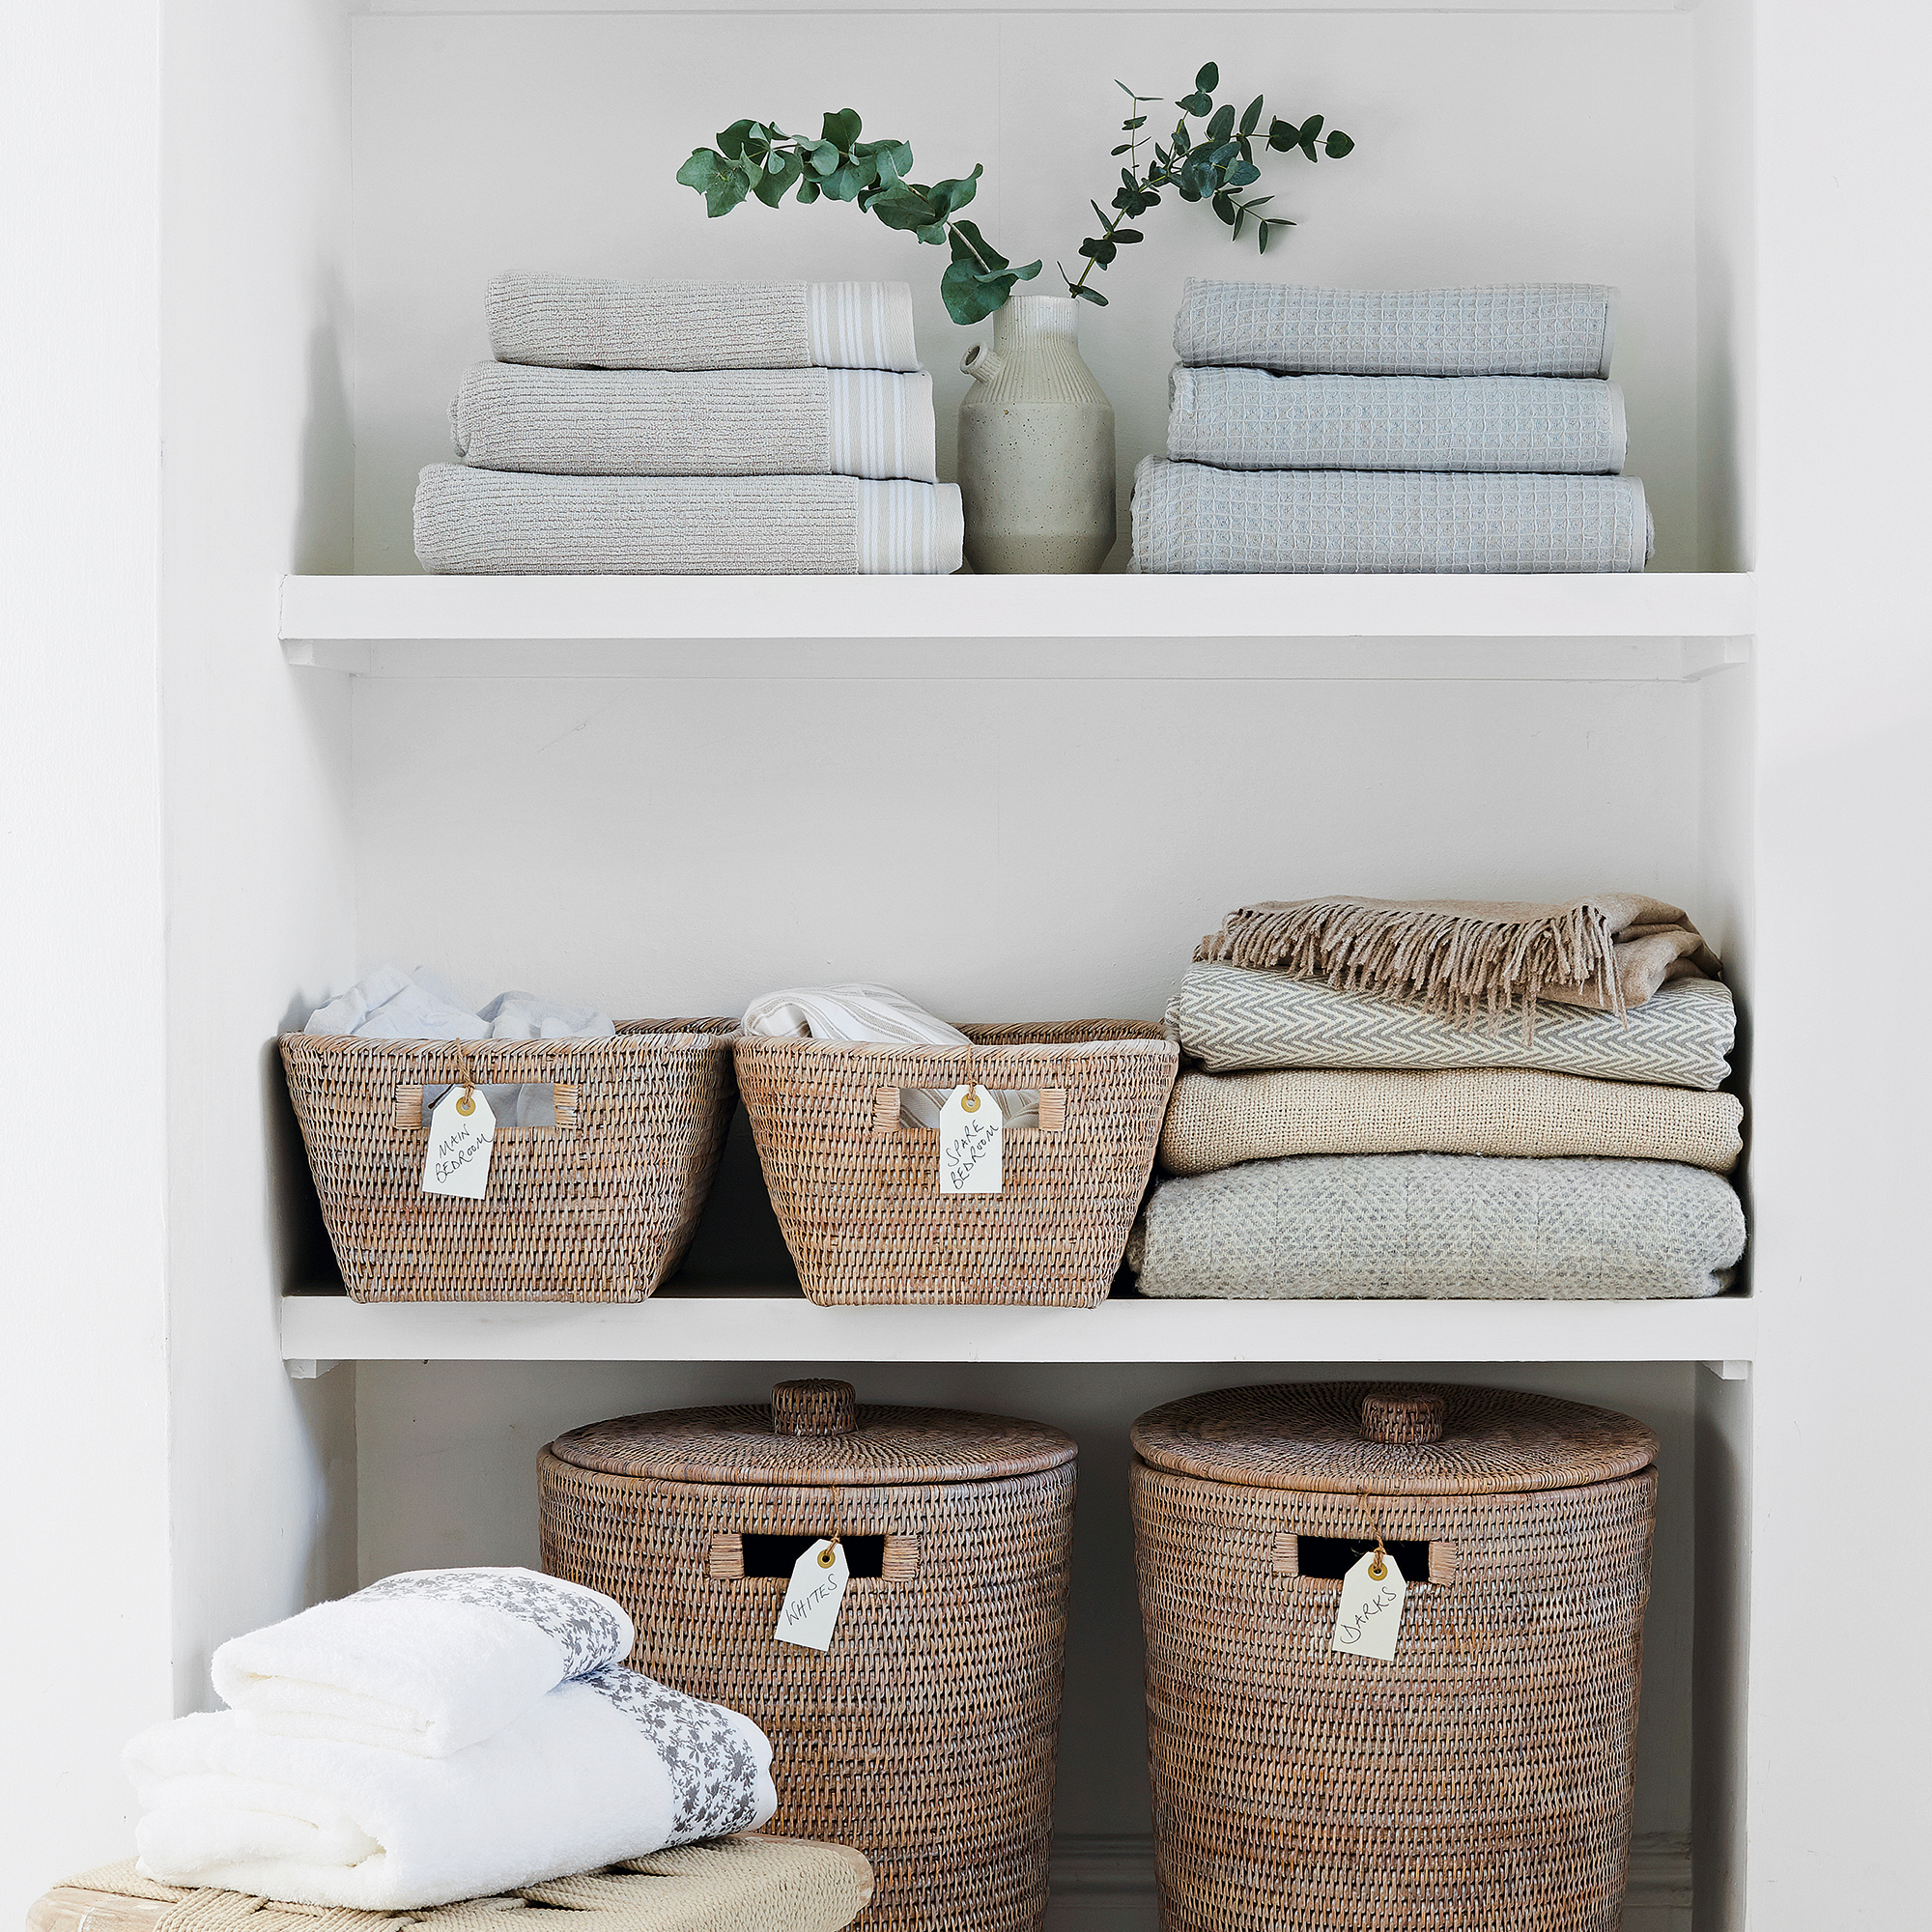 How to get organising a linen cupboard: the ultimate guide